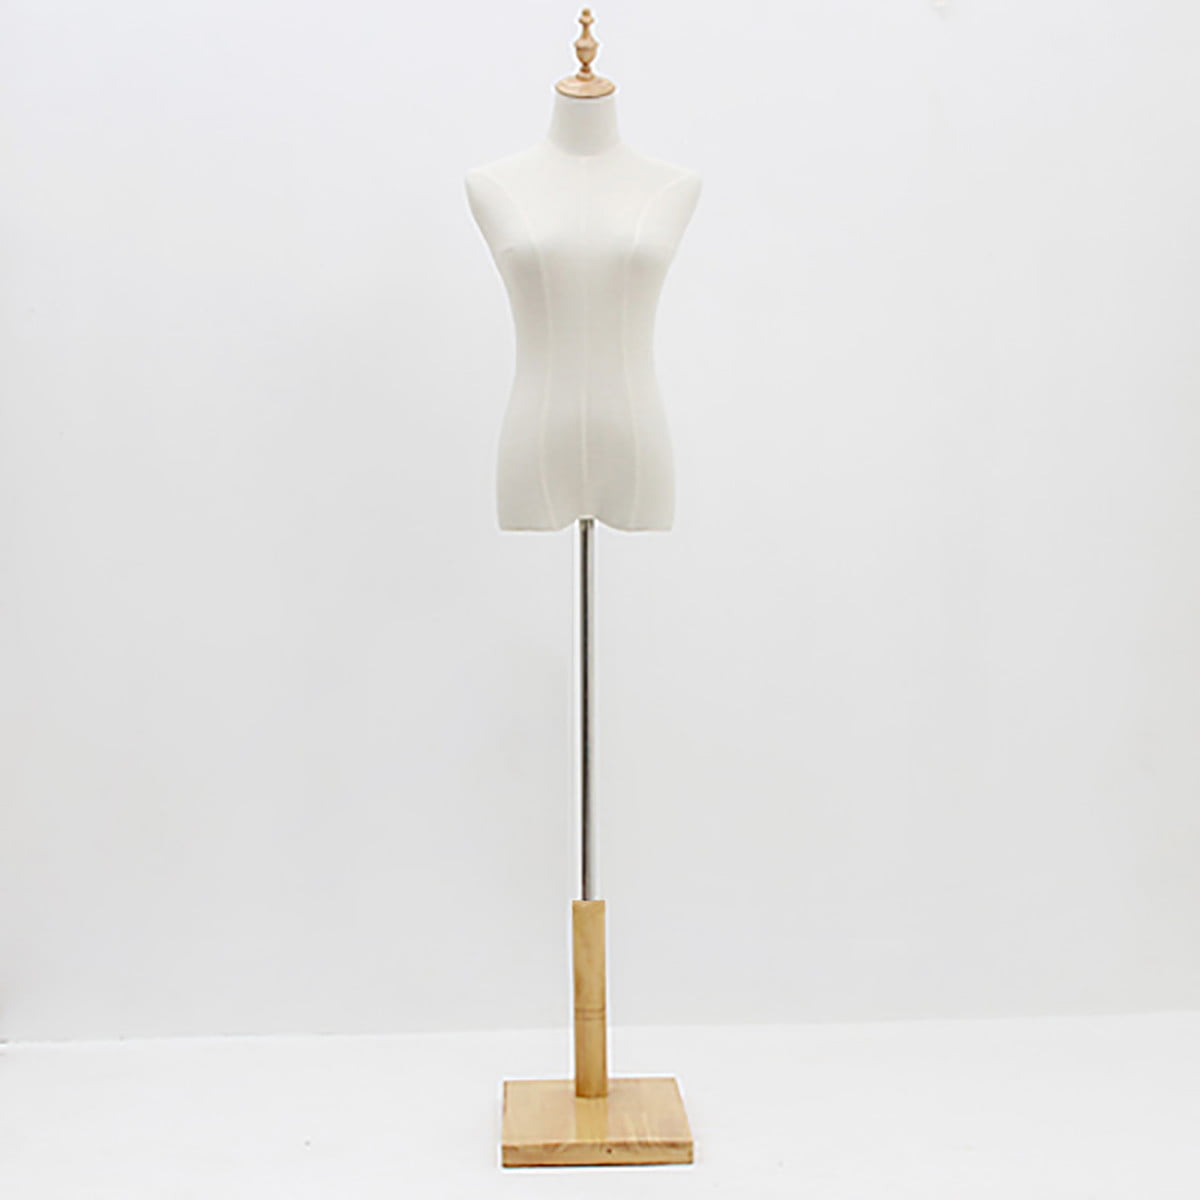 New White Female Mannequin Torso Dress Form Clothing Display w Tripod Stand Base 